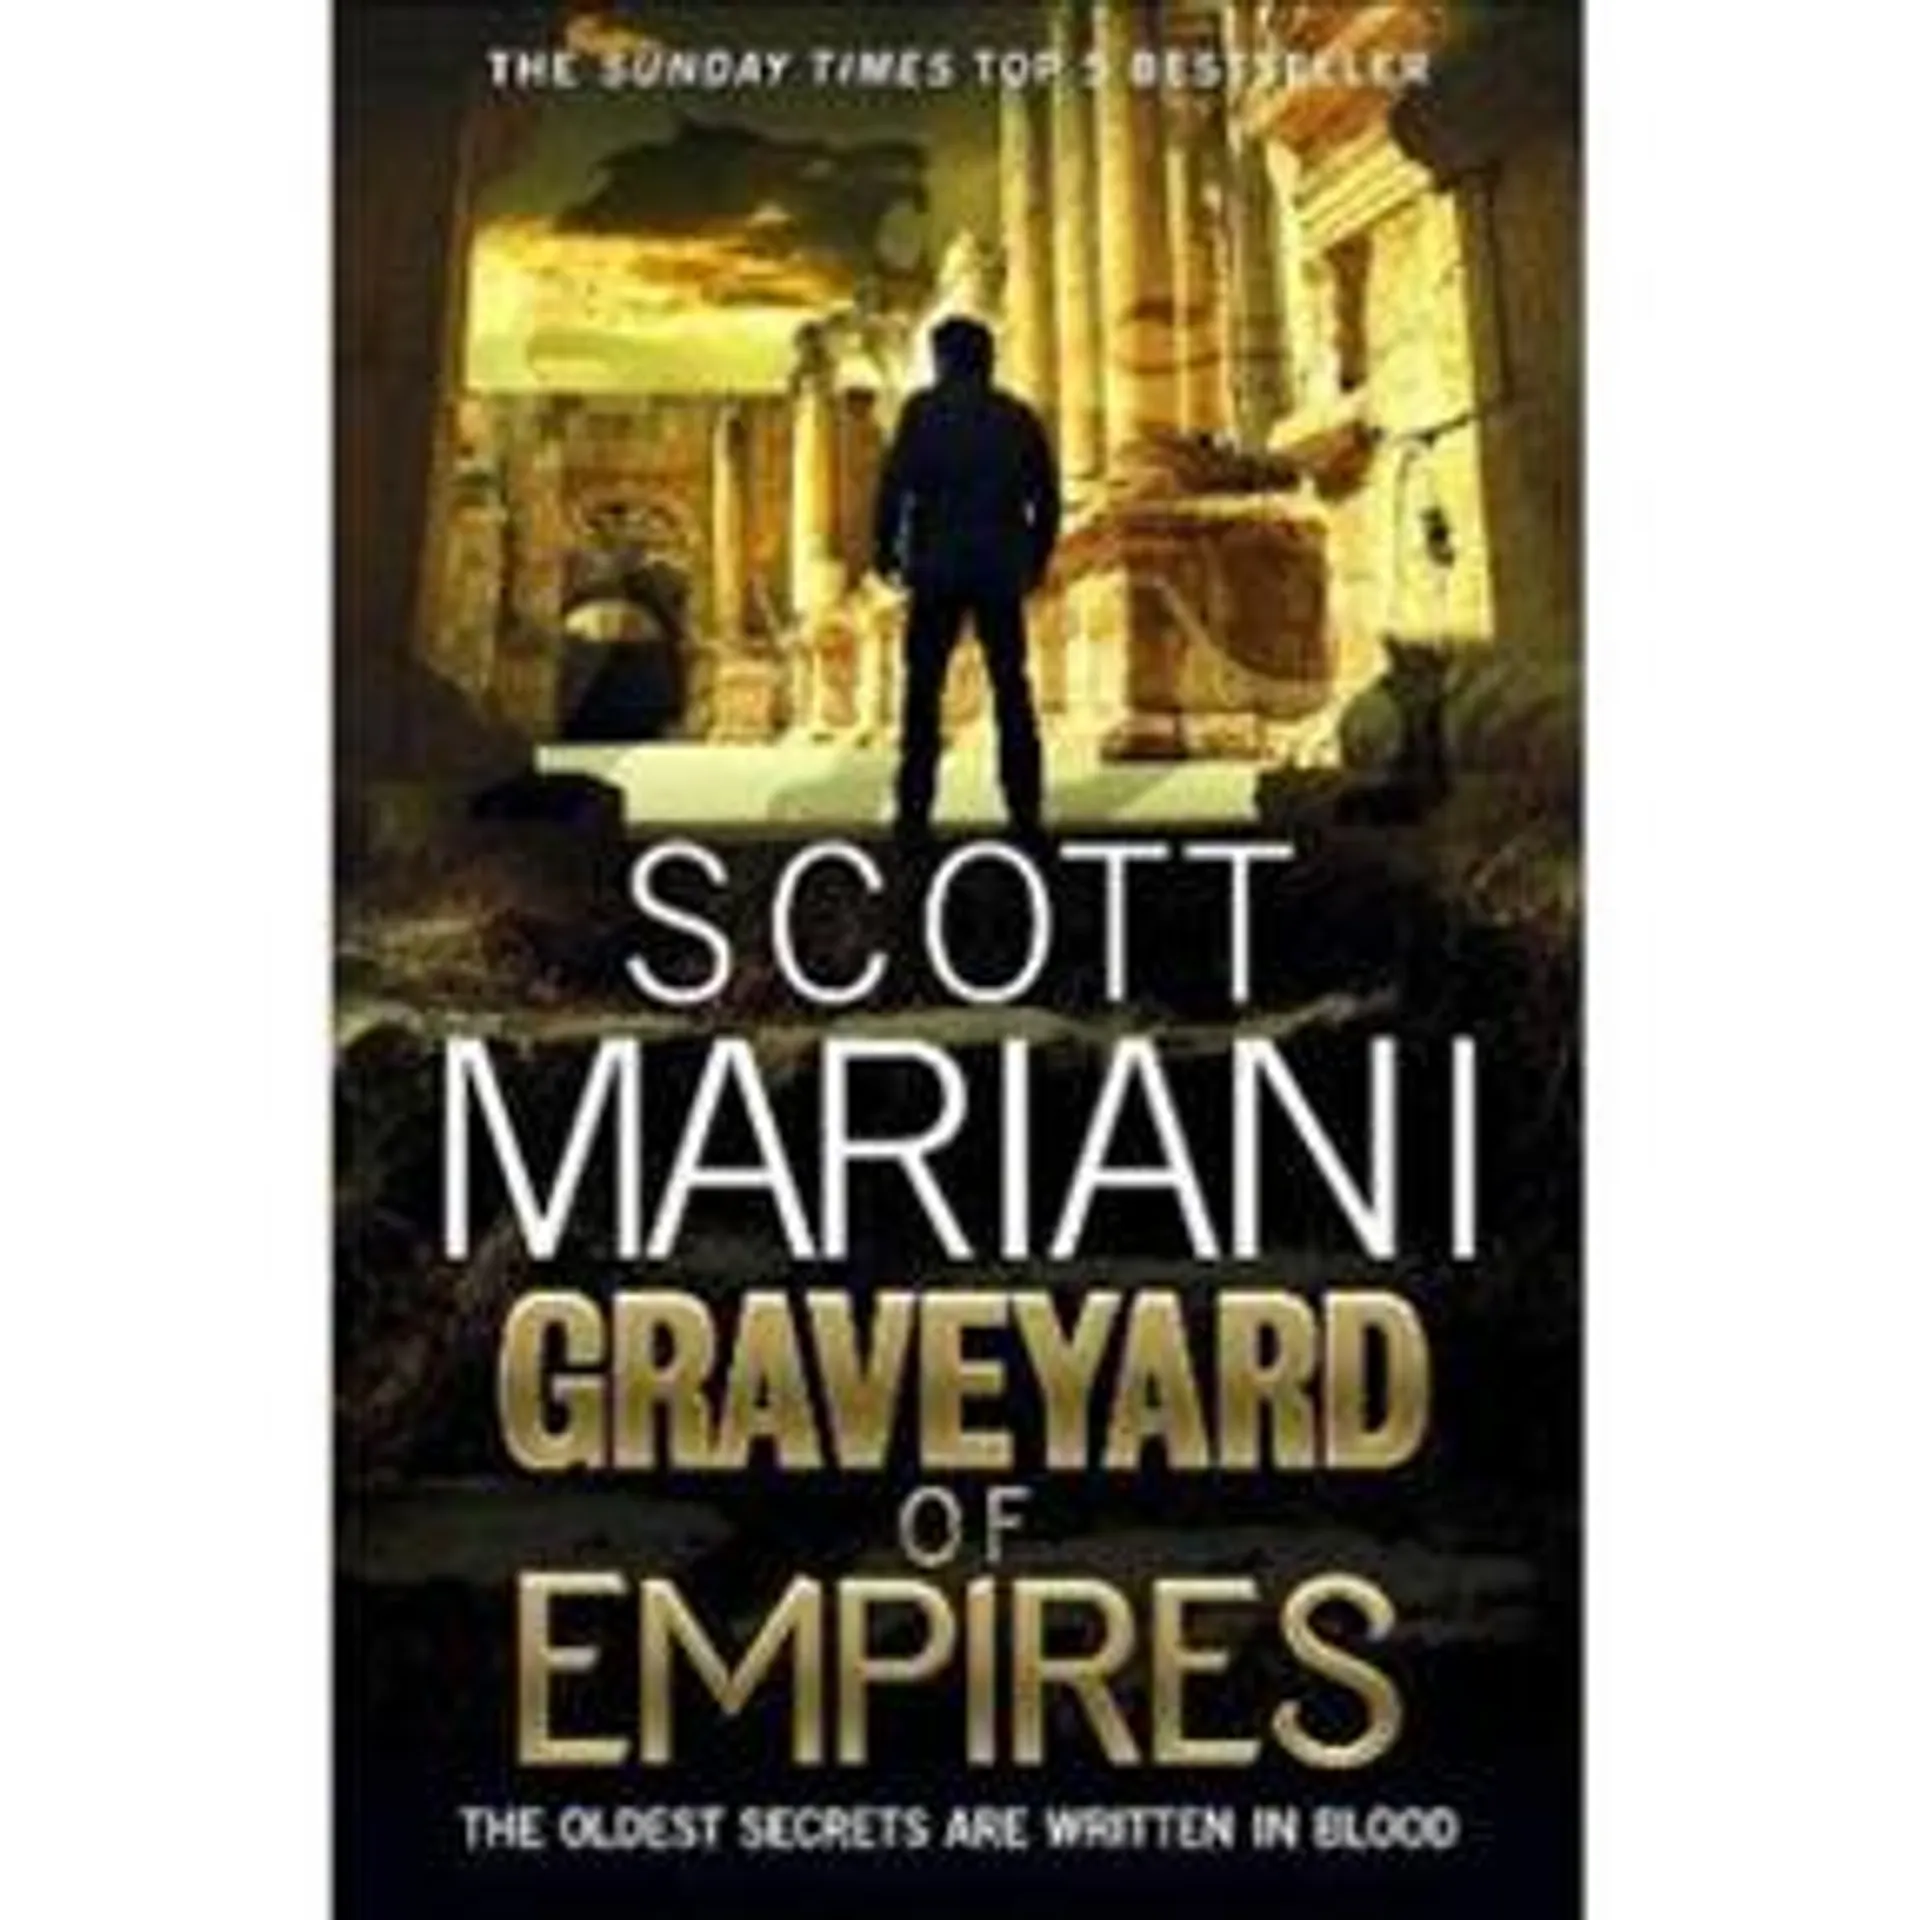 Paperback Graveyard of Empires by Scott Mariani